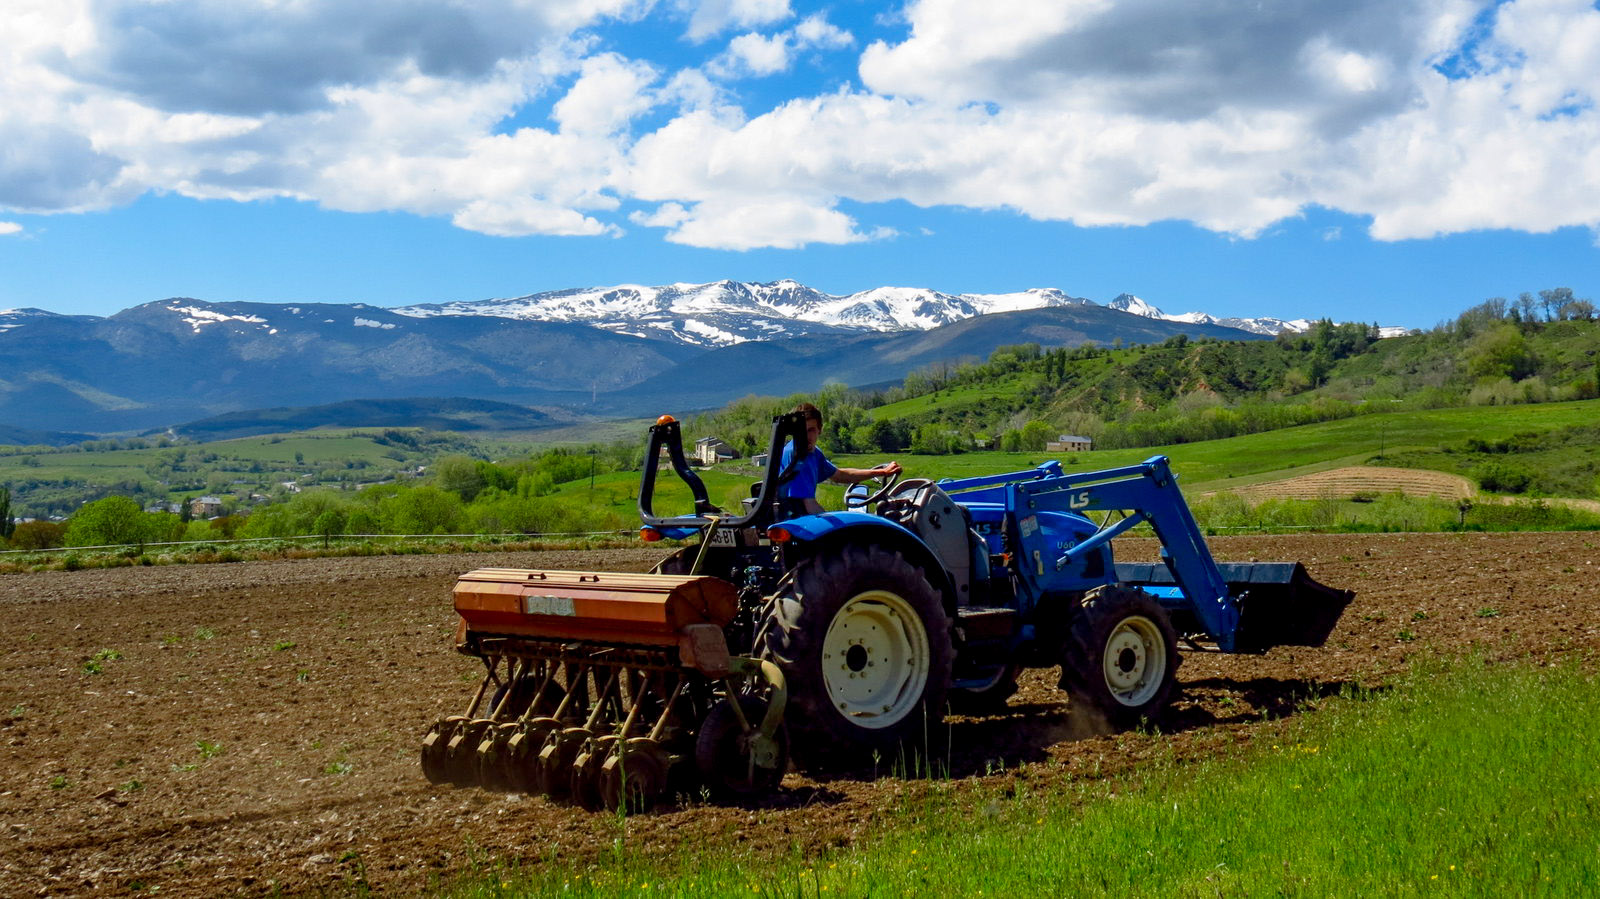 tractor-and-field-les-bains-de-llo-pyrenees